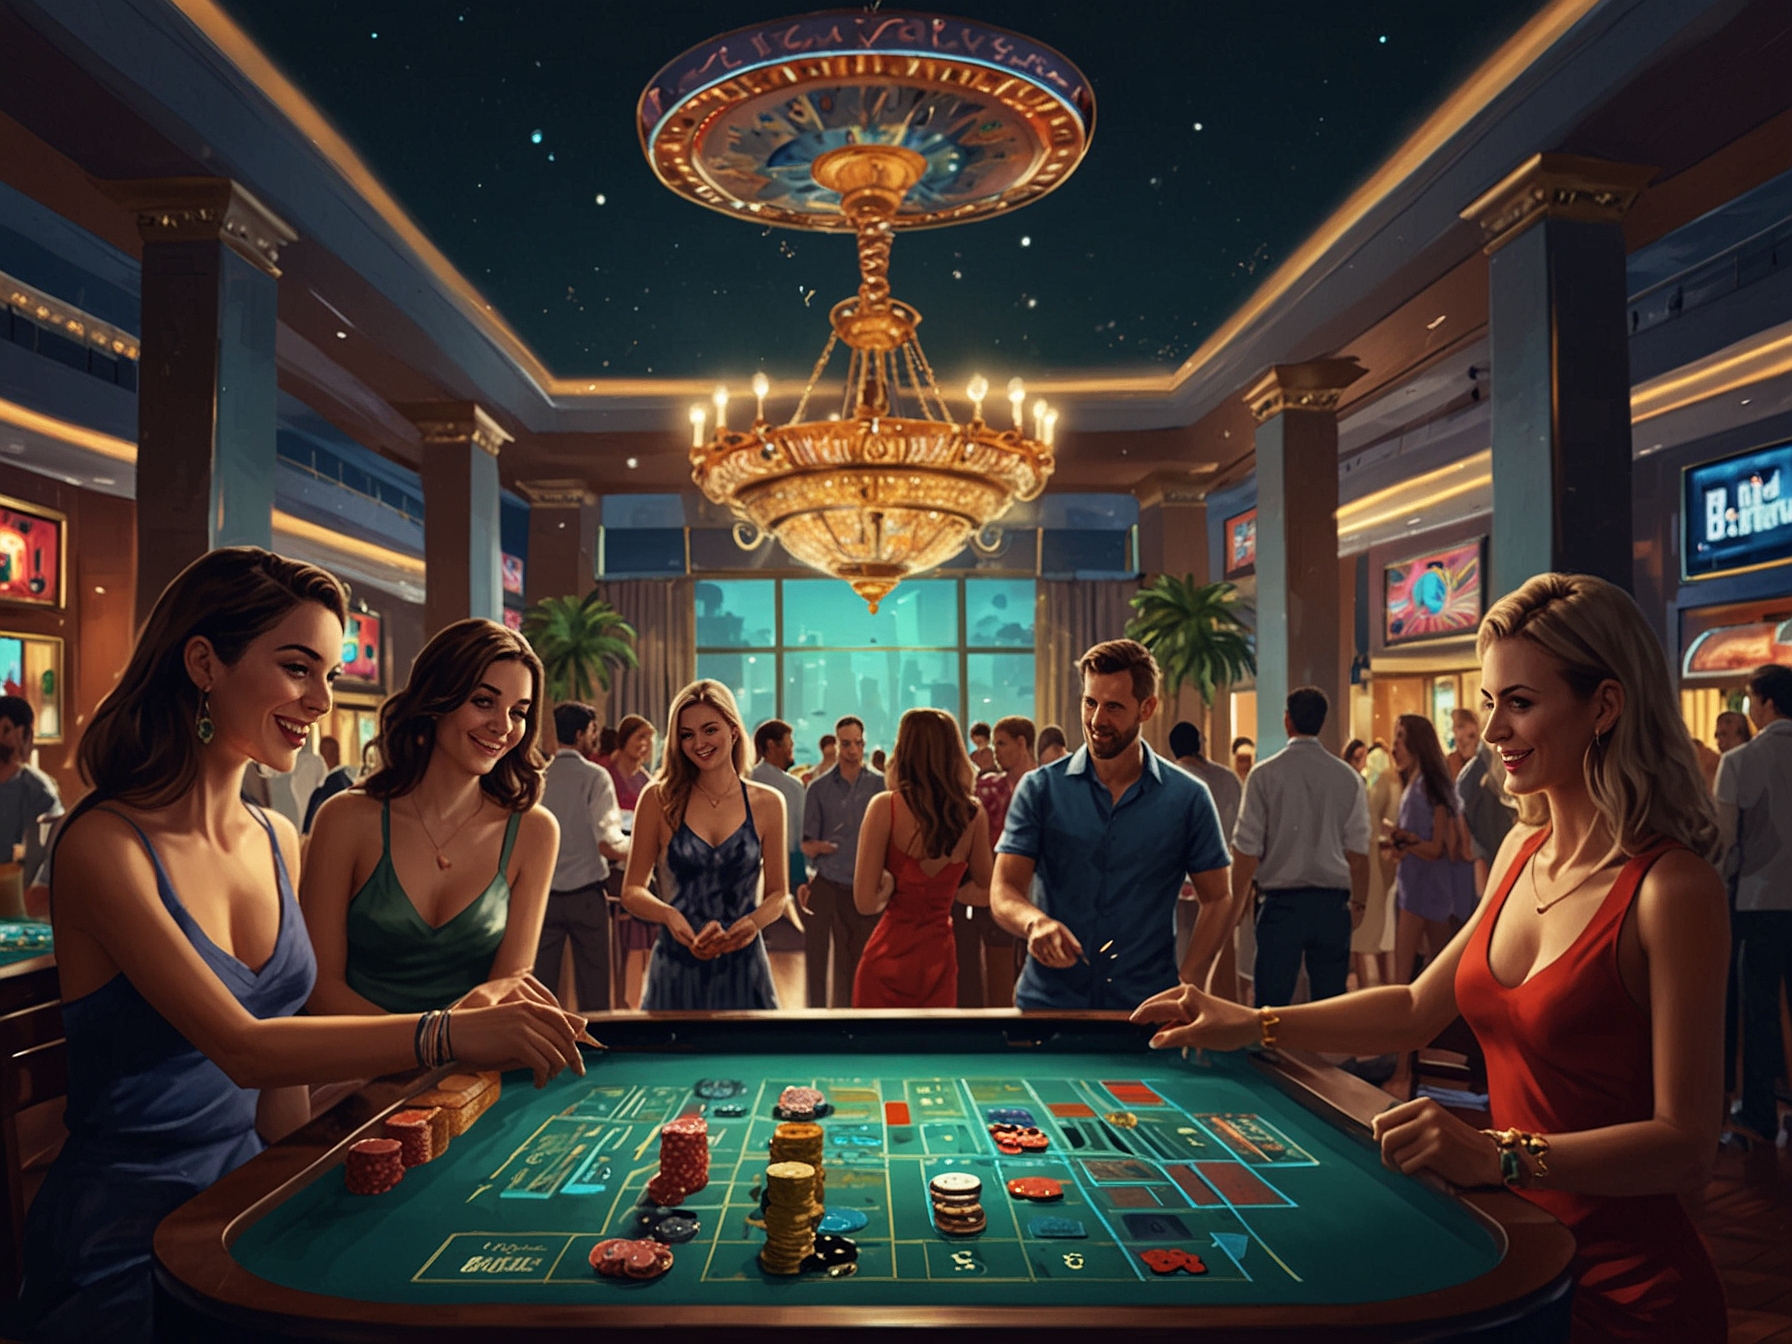 Tourists enjoying indoor activities, including a lively casino and a luxurious hotel pool party with a DJ, demonstrating the city's vibrant entertainment options.